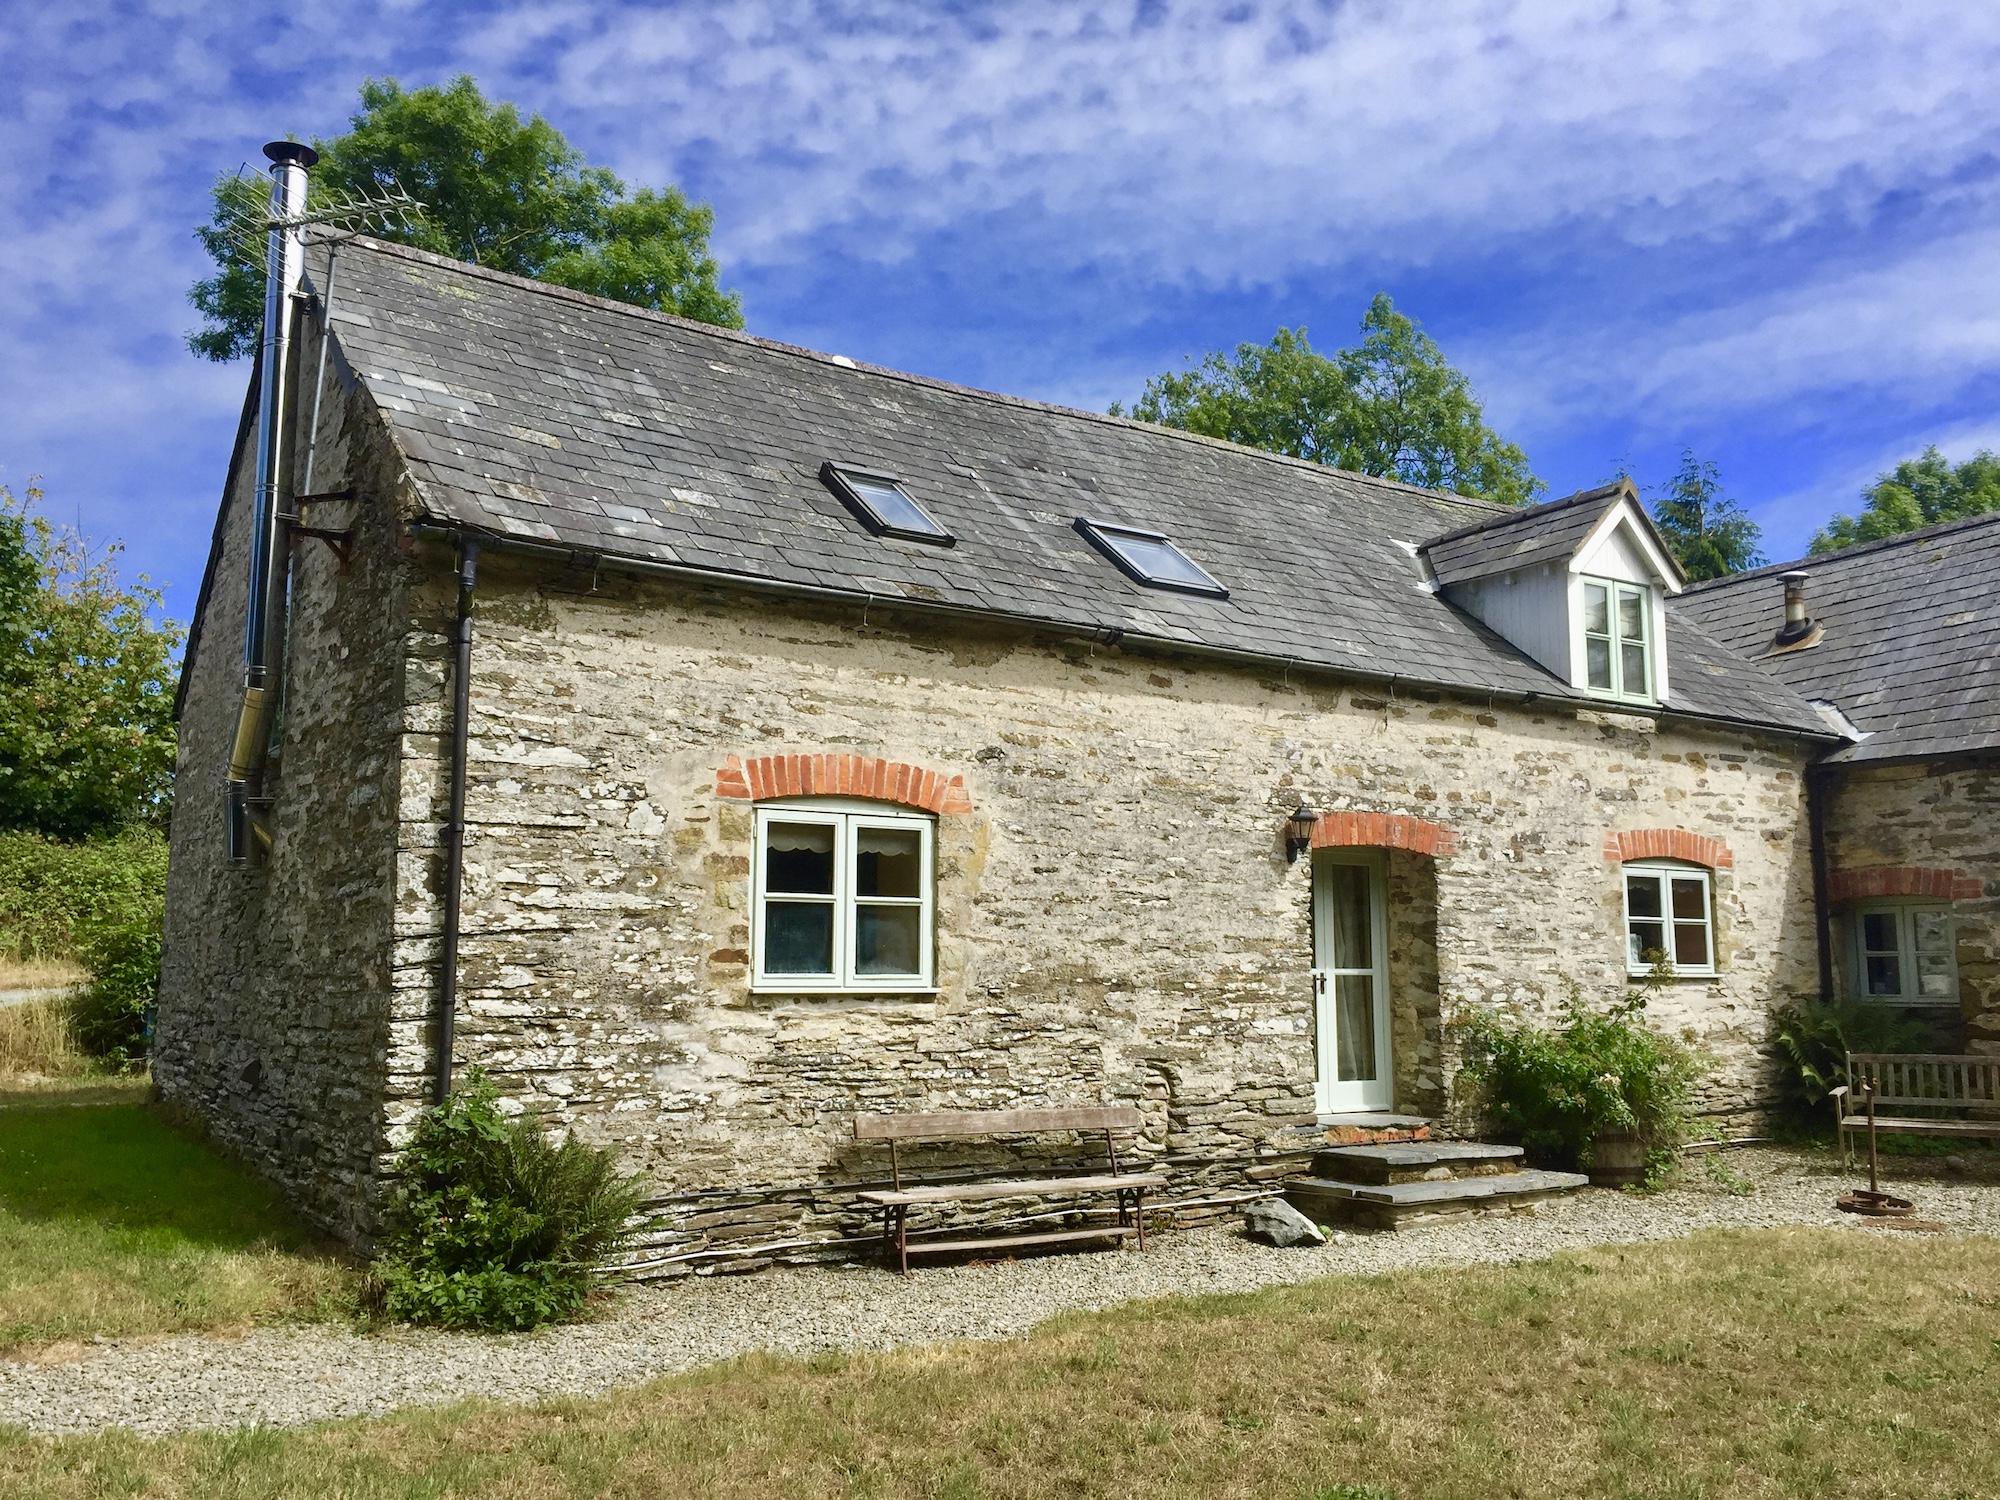 Self-Catering in Aberporth holidays at Cool Places